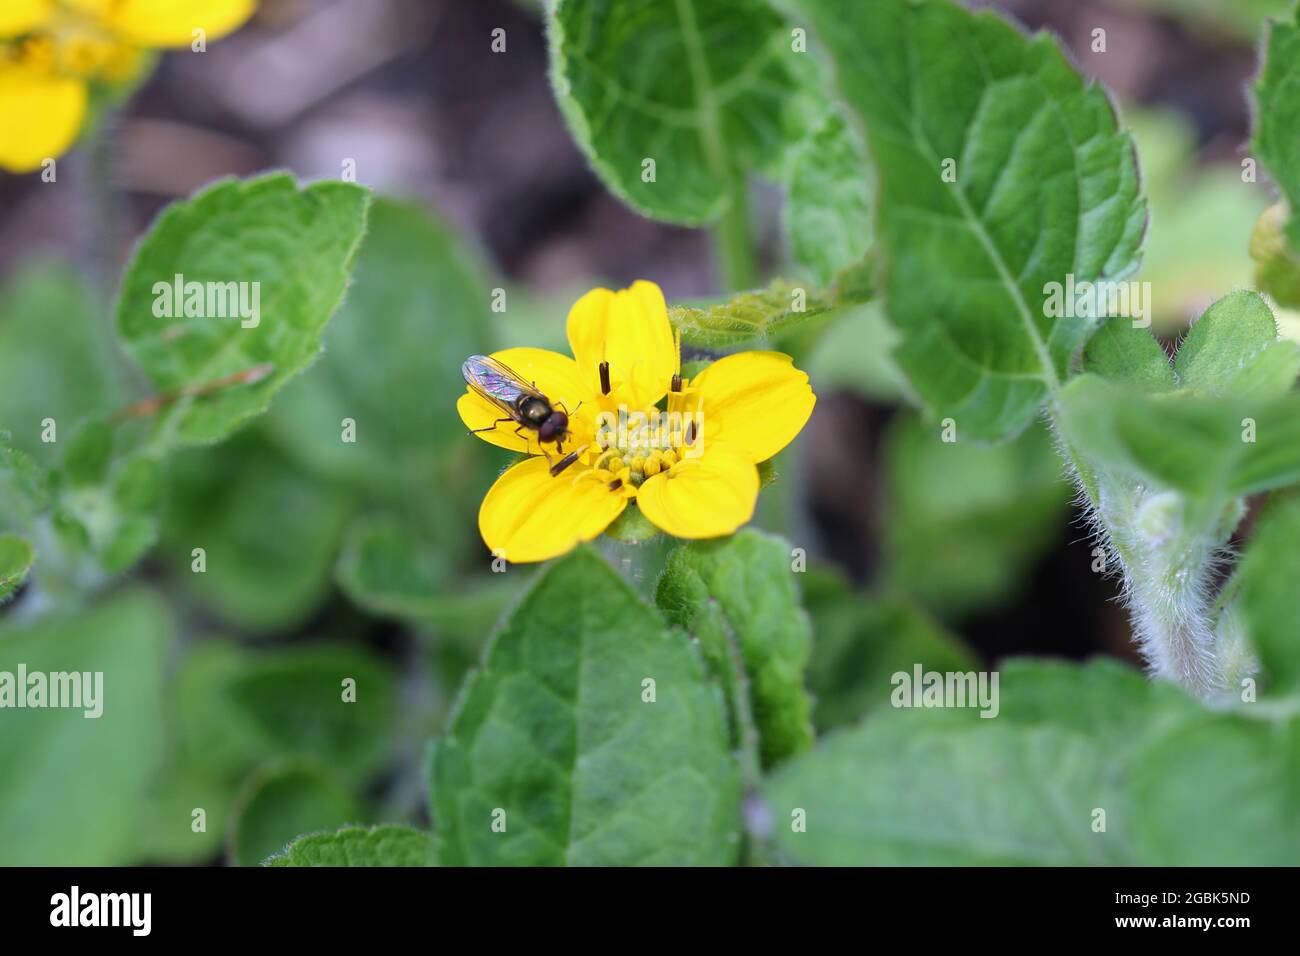 Yellow golden knee, Chrysogonum virginianum, flower close up with a hoverfly, Platycheirus species, and a blurred background of leaves. Stock Photo